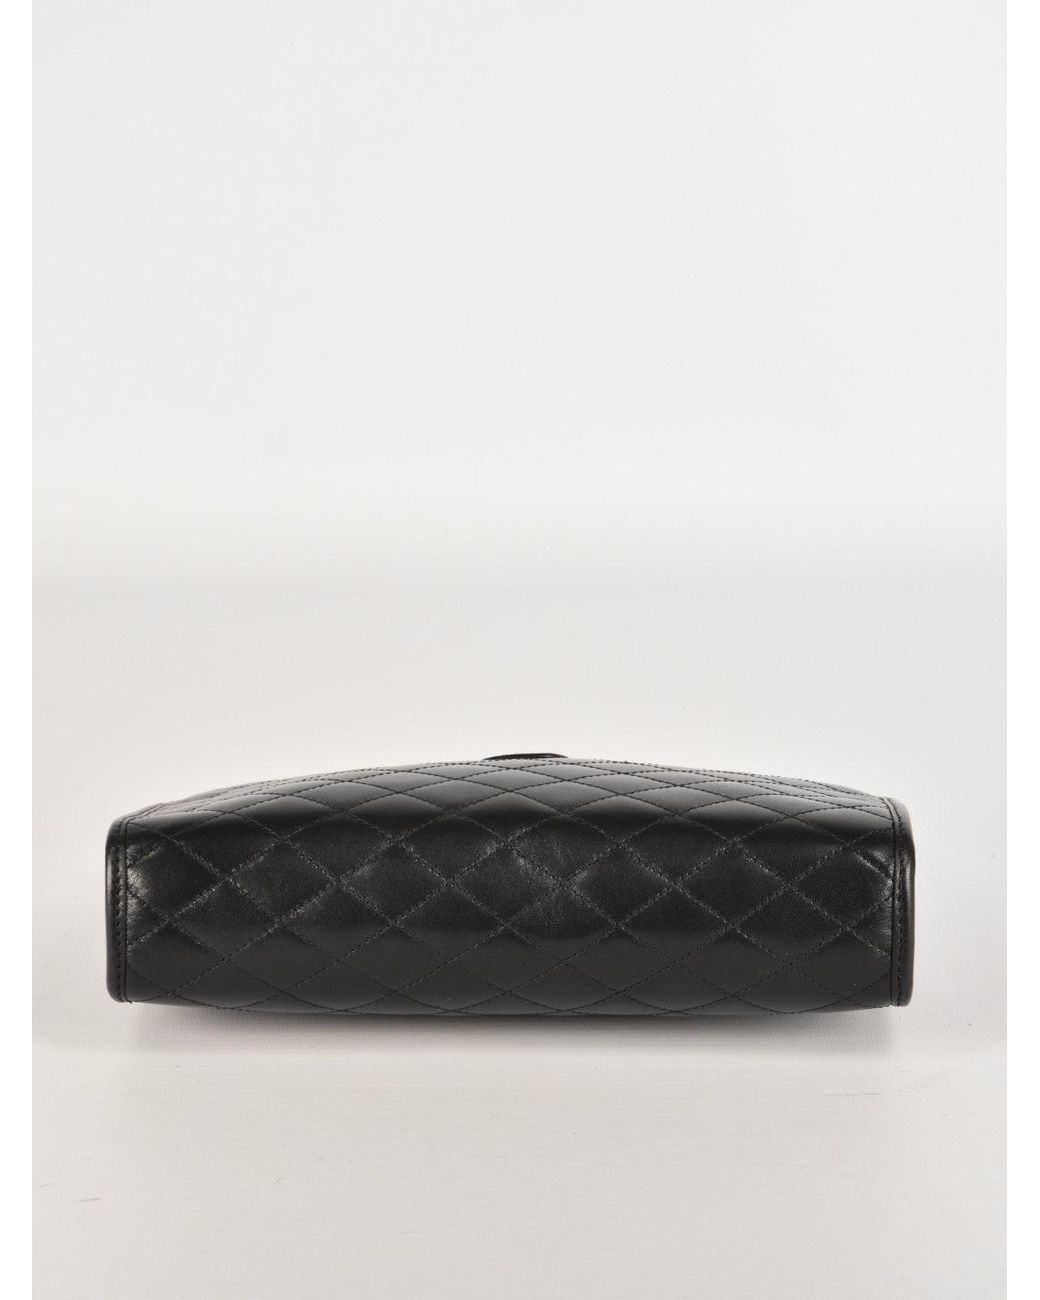 Saint Laurent Baby Victoire Quilted Clutch Bag - Farfetch